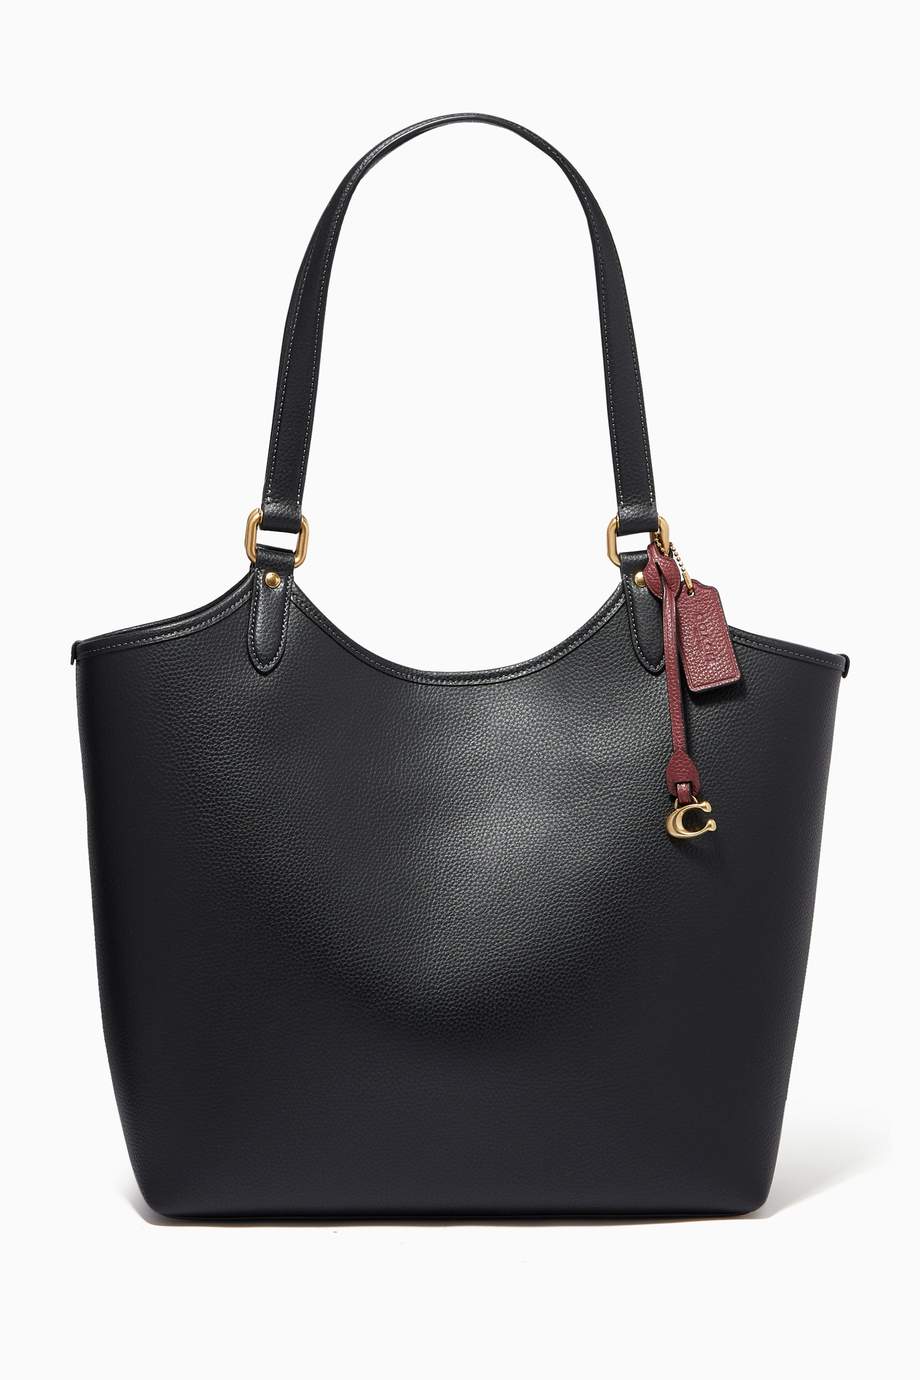 Shop Coach Black Day Tote in Pebble Leather for Women | Ounass UAE